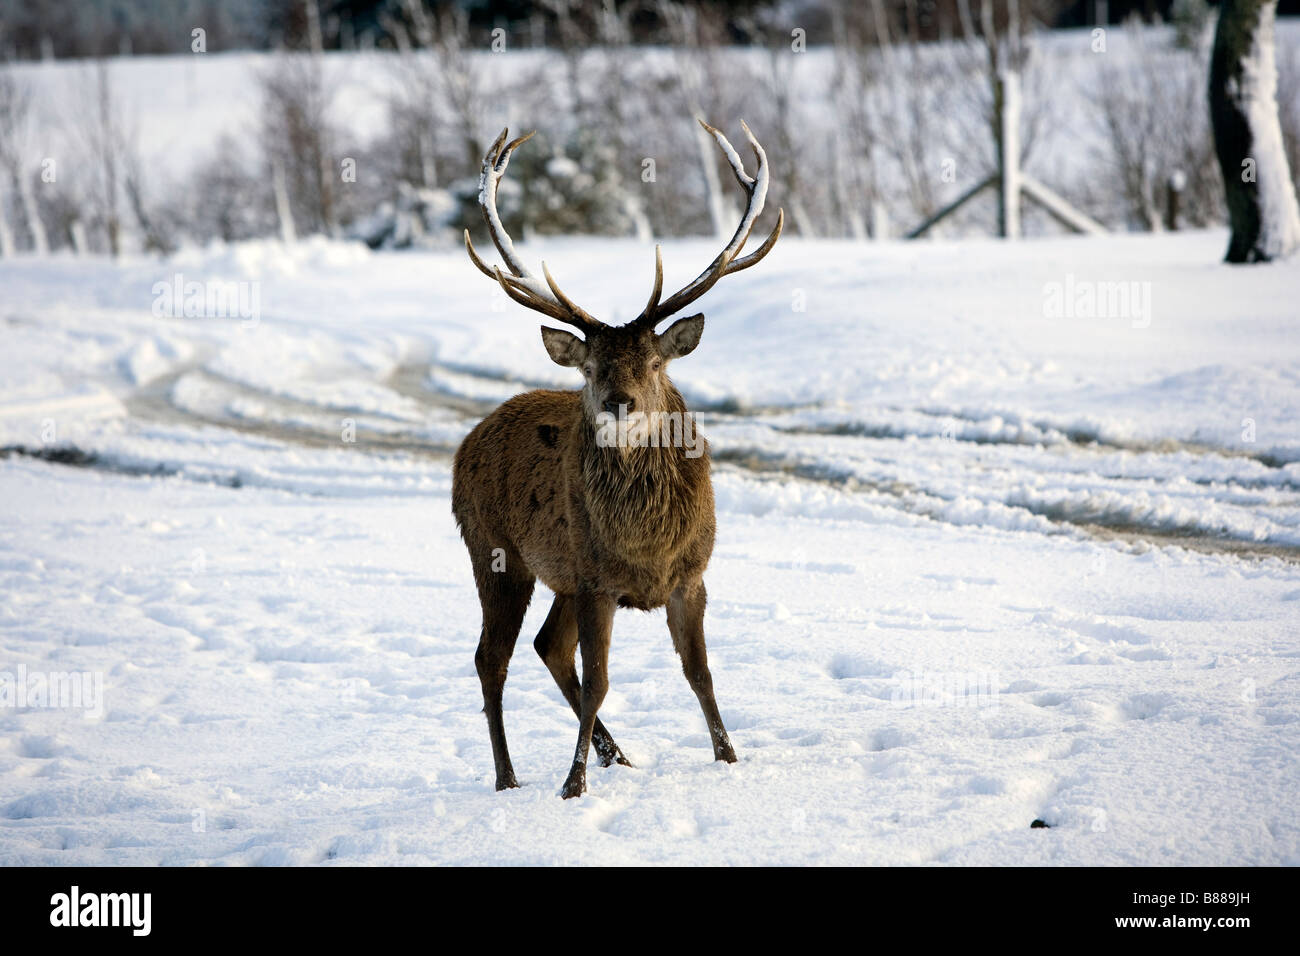 A red stag deer in a snow scene Stock Photo